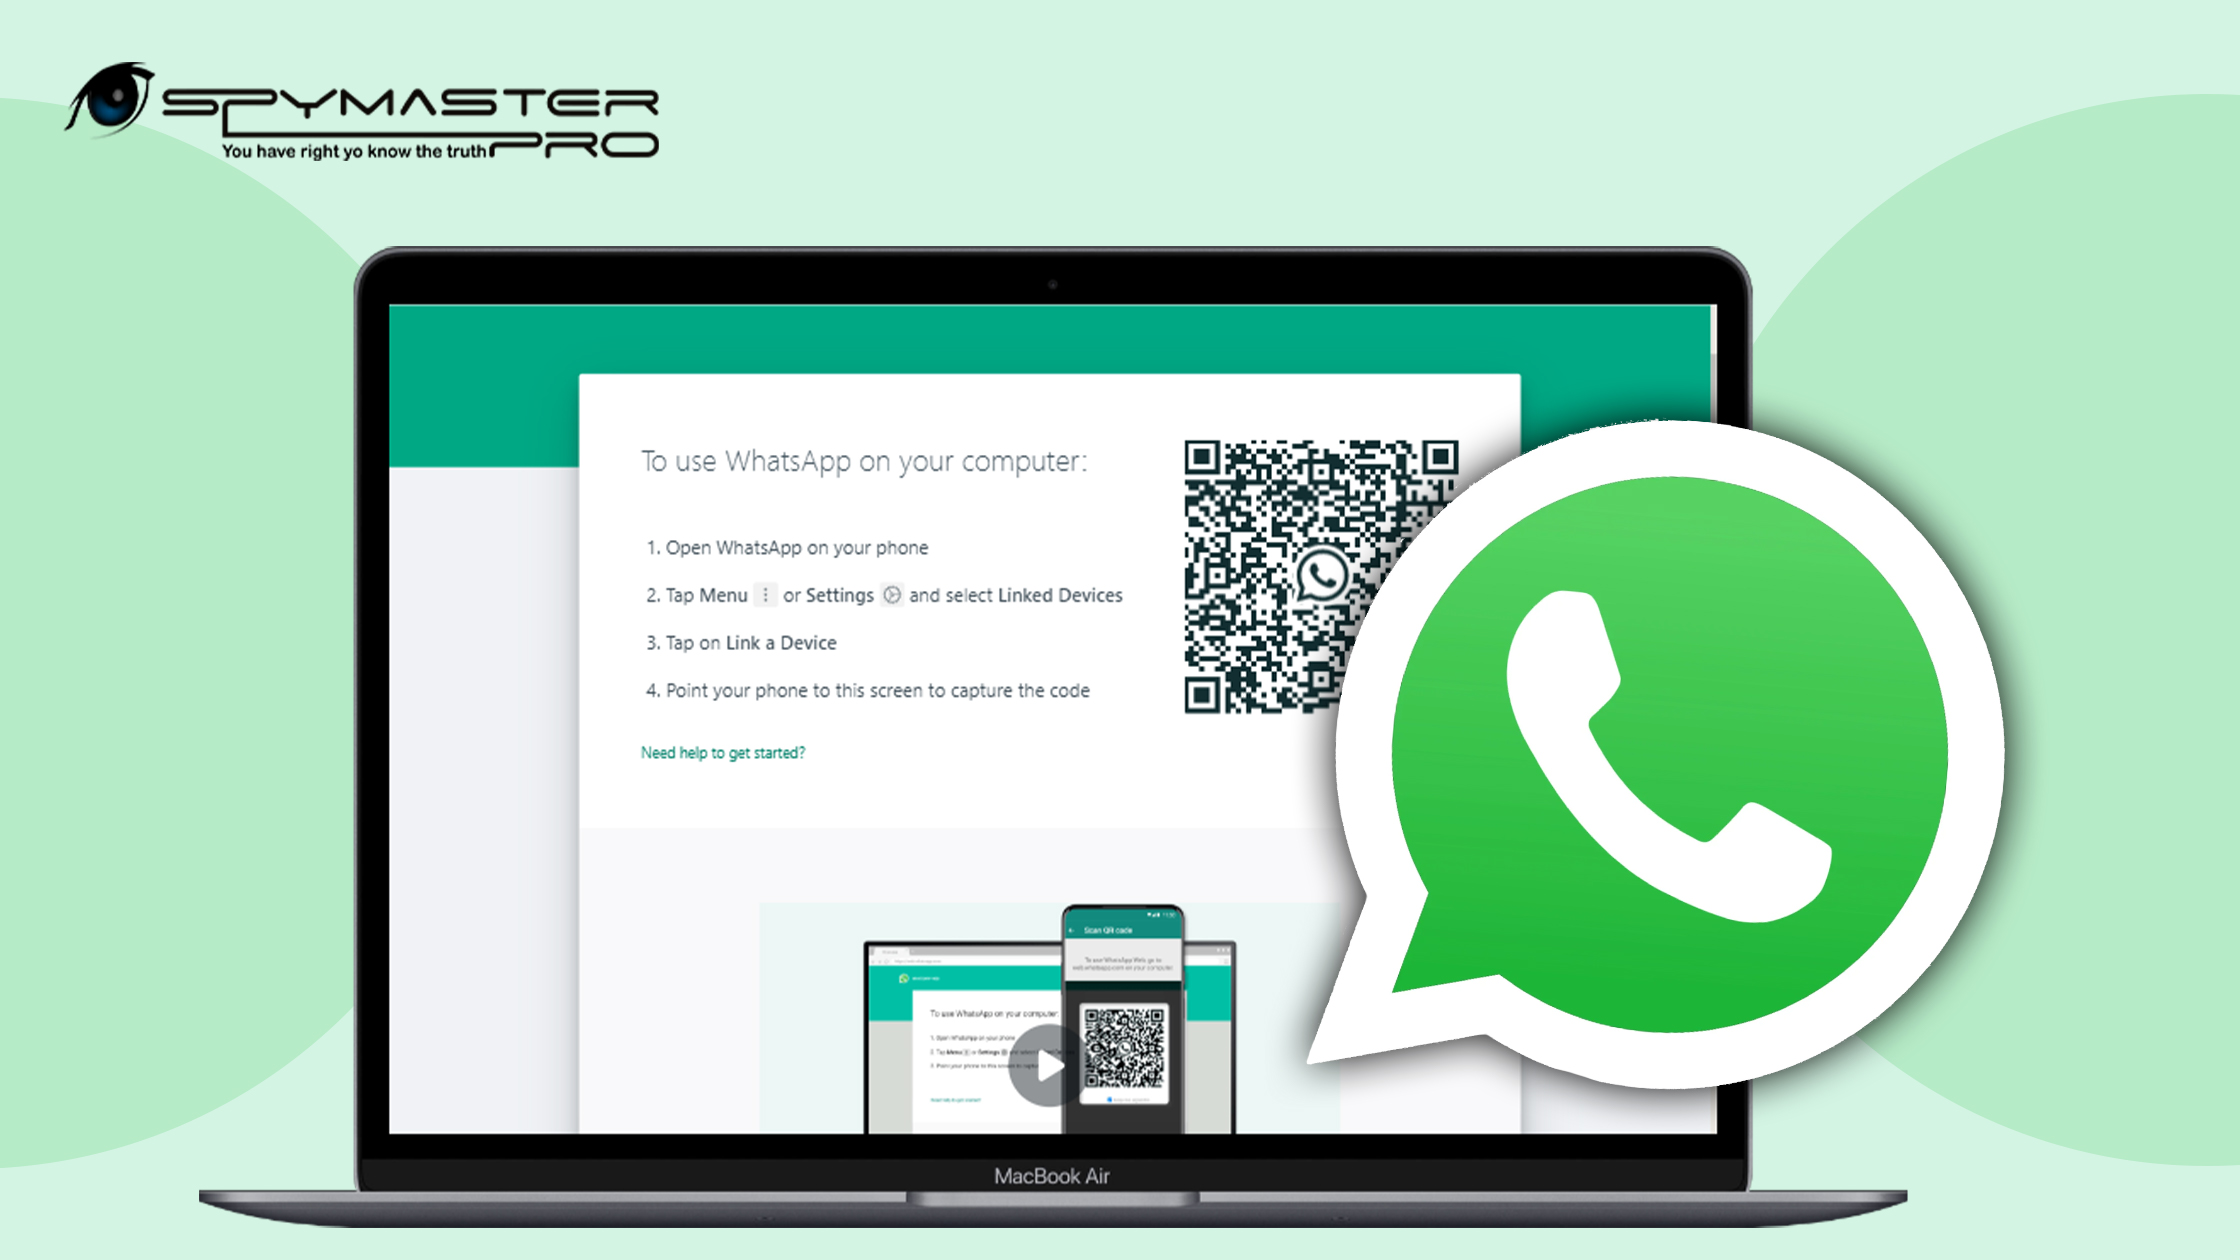 How Can We Check Others WhatsApp Chat with QR Code